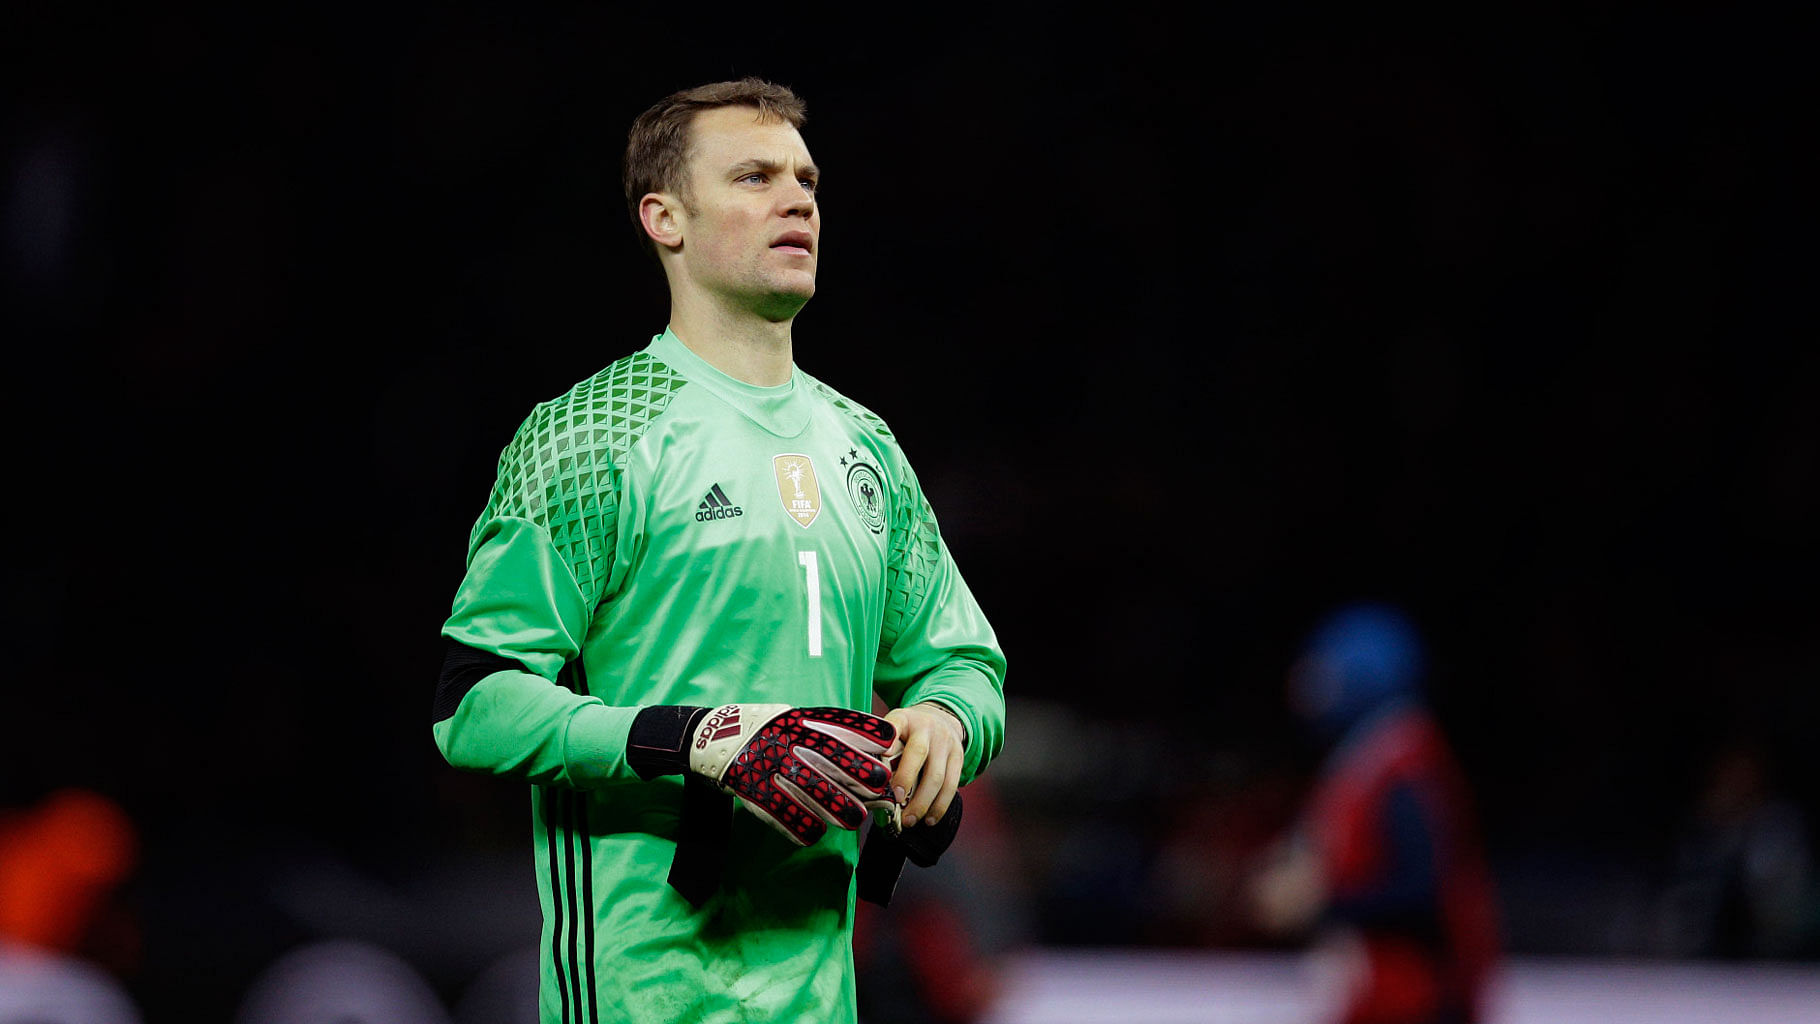 Manuel Neuer has been named as the captain of Germany. (Photo: AP)